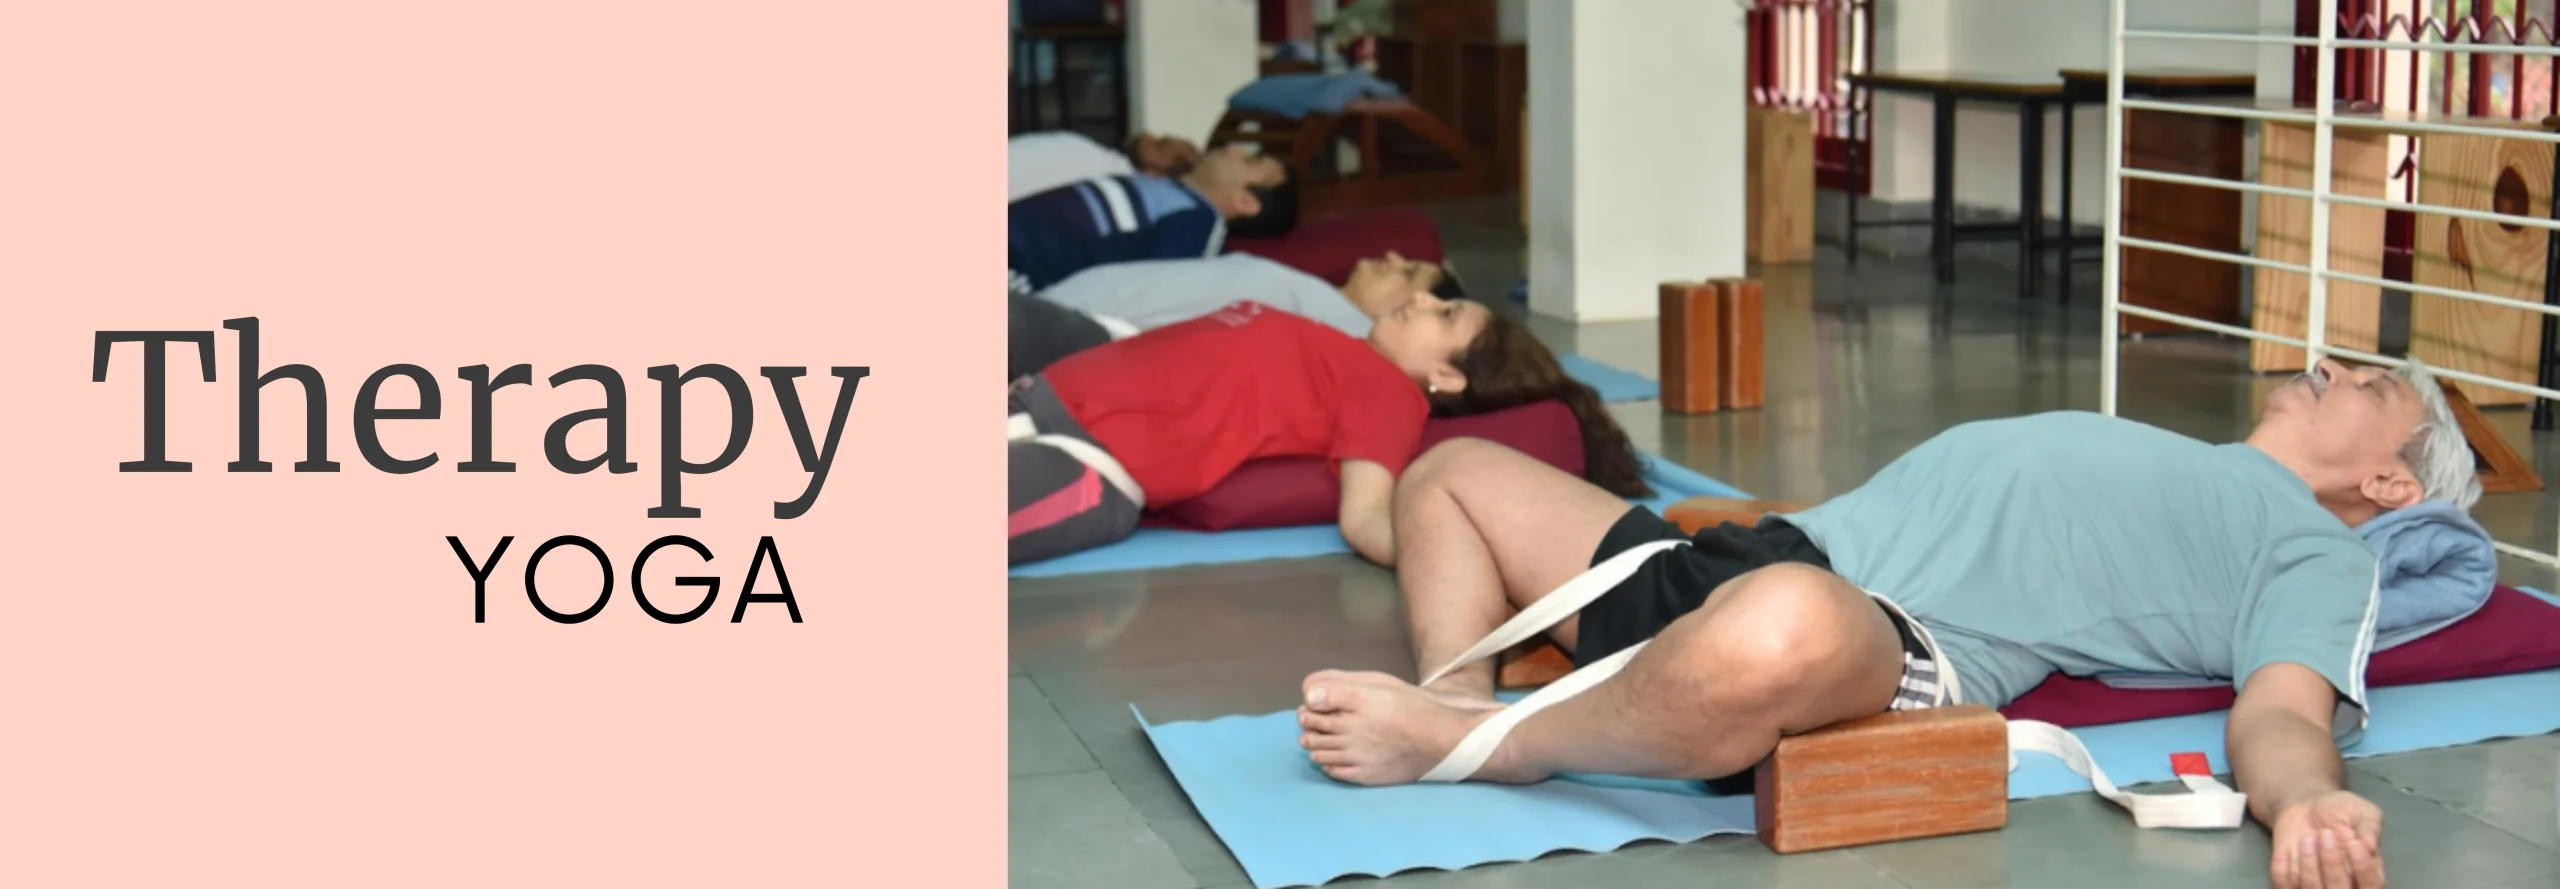 Therapy Yoga Banner | Yoga.in